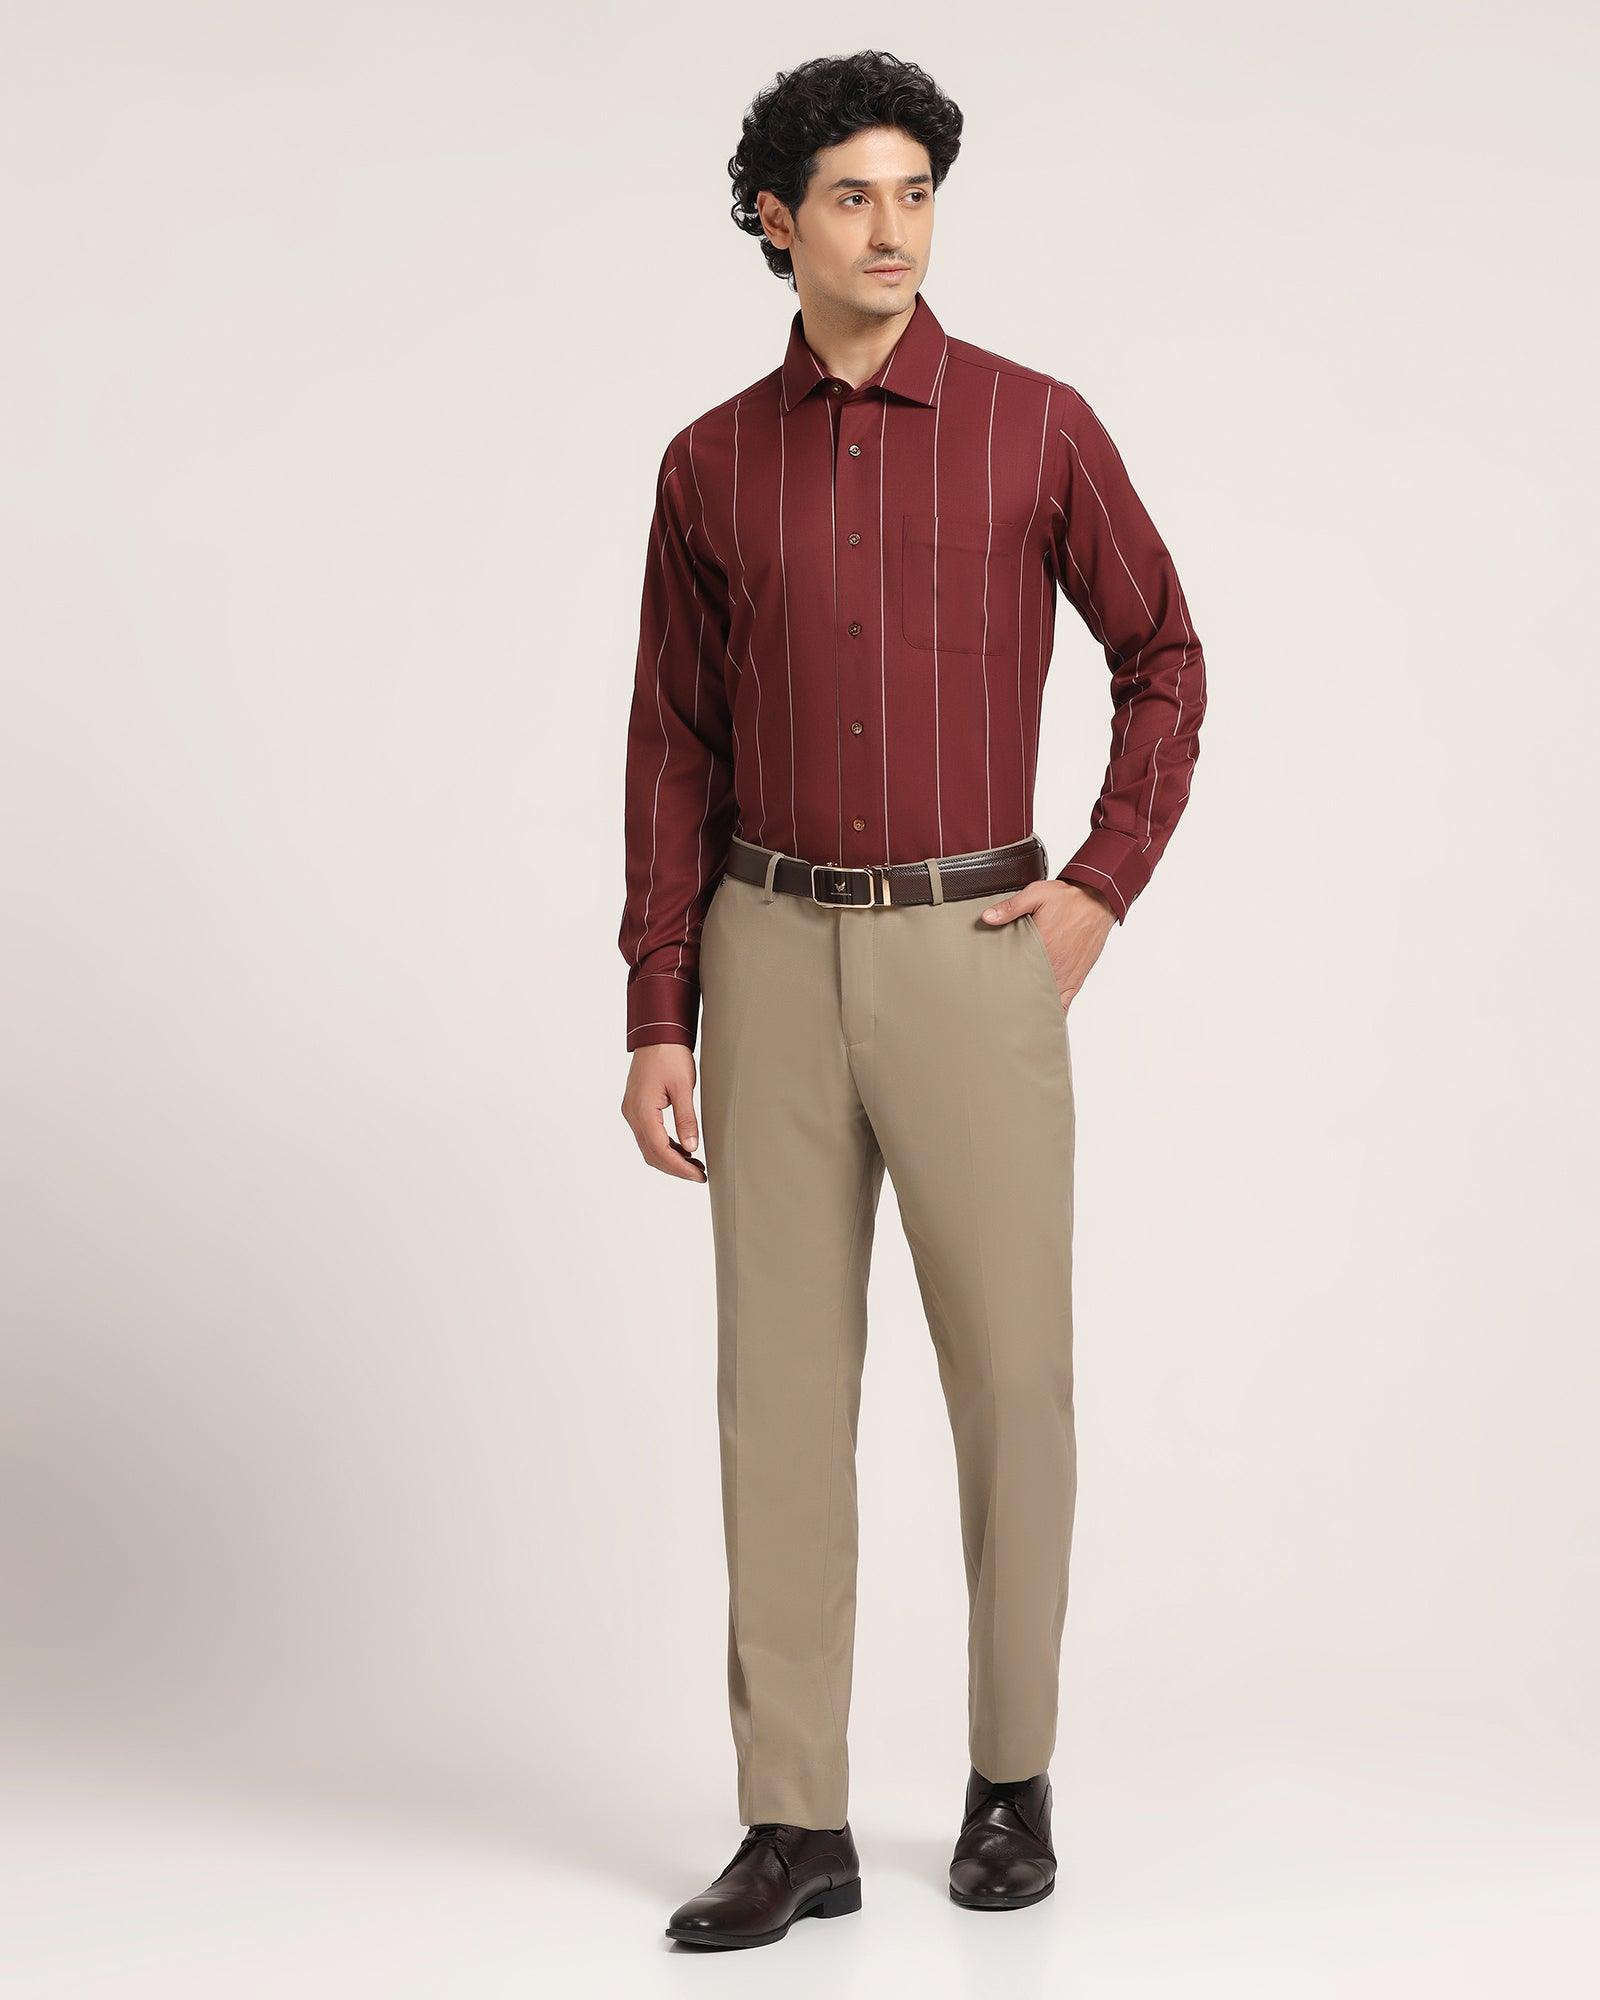 Brown Dress Pants with Red and Black Shirt Outfits For Men (5 ideas &  outfits) | Lookastic